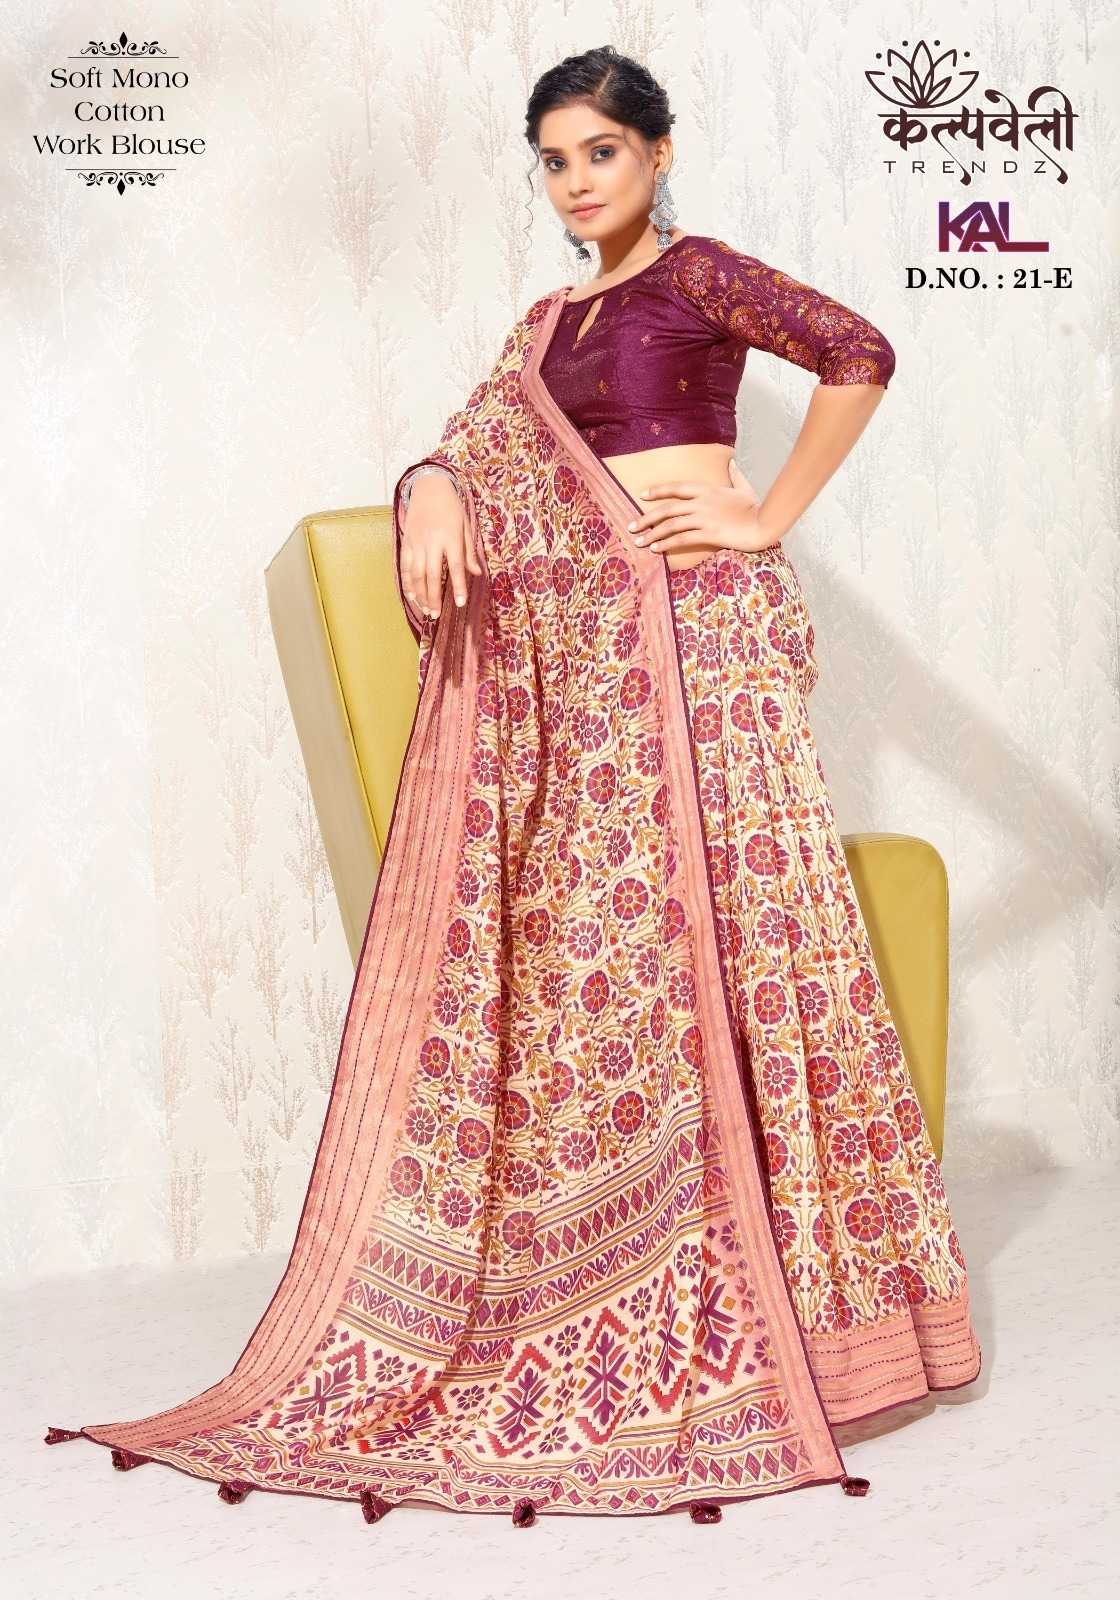 kalpavelly trendz kal 21 latest collection of casual wear sarees